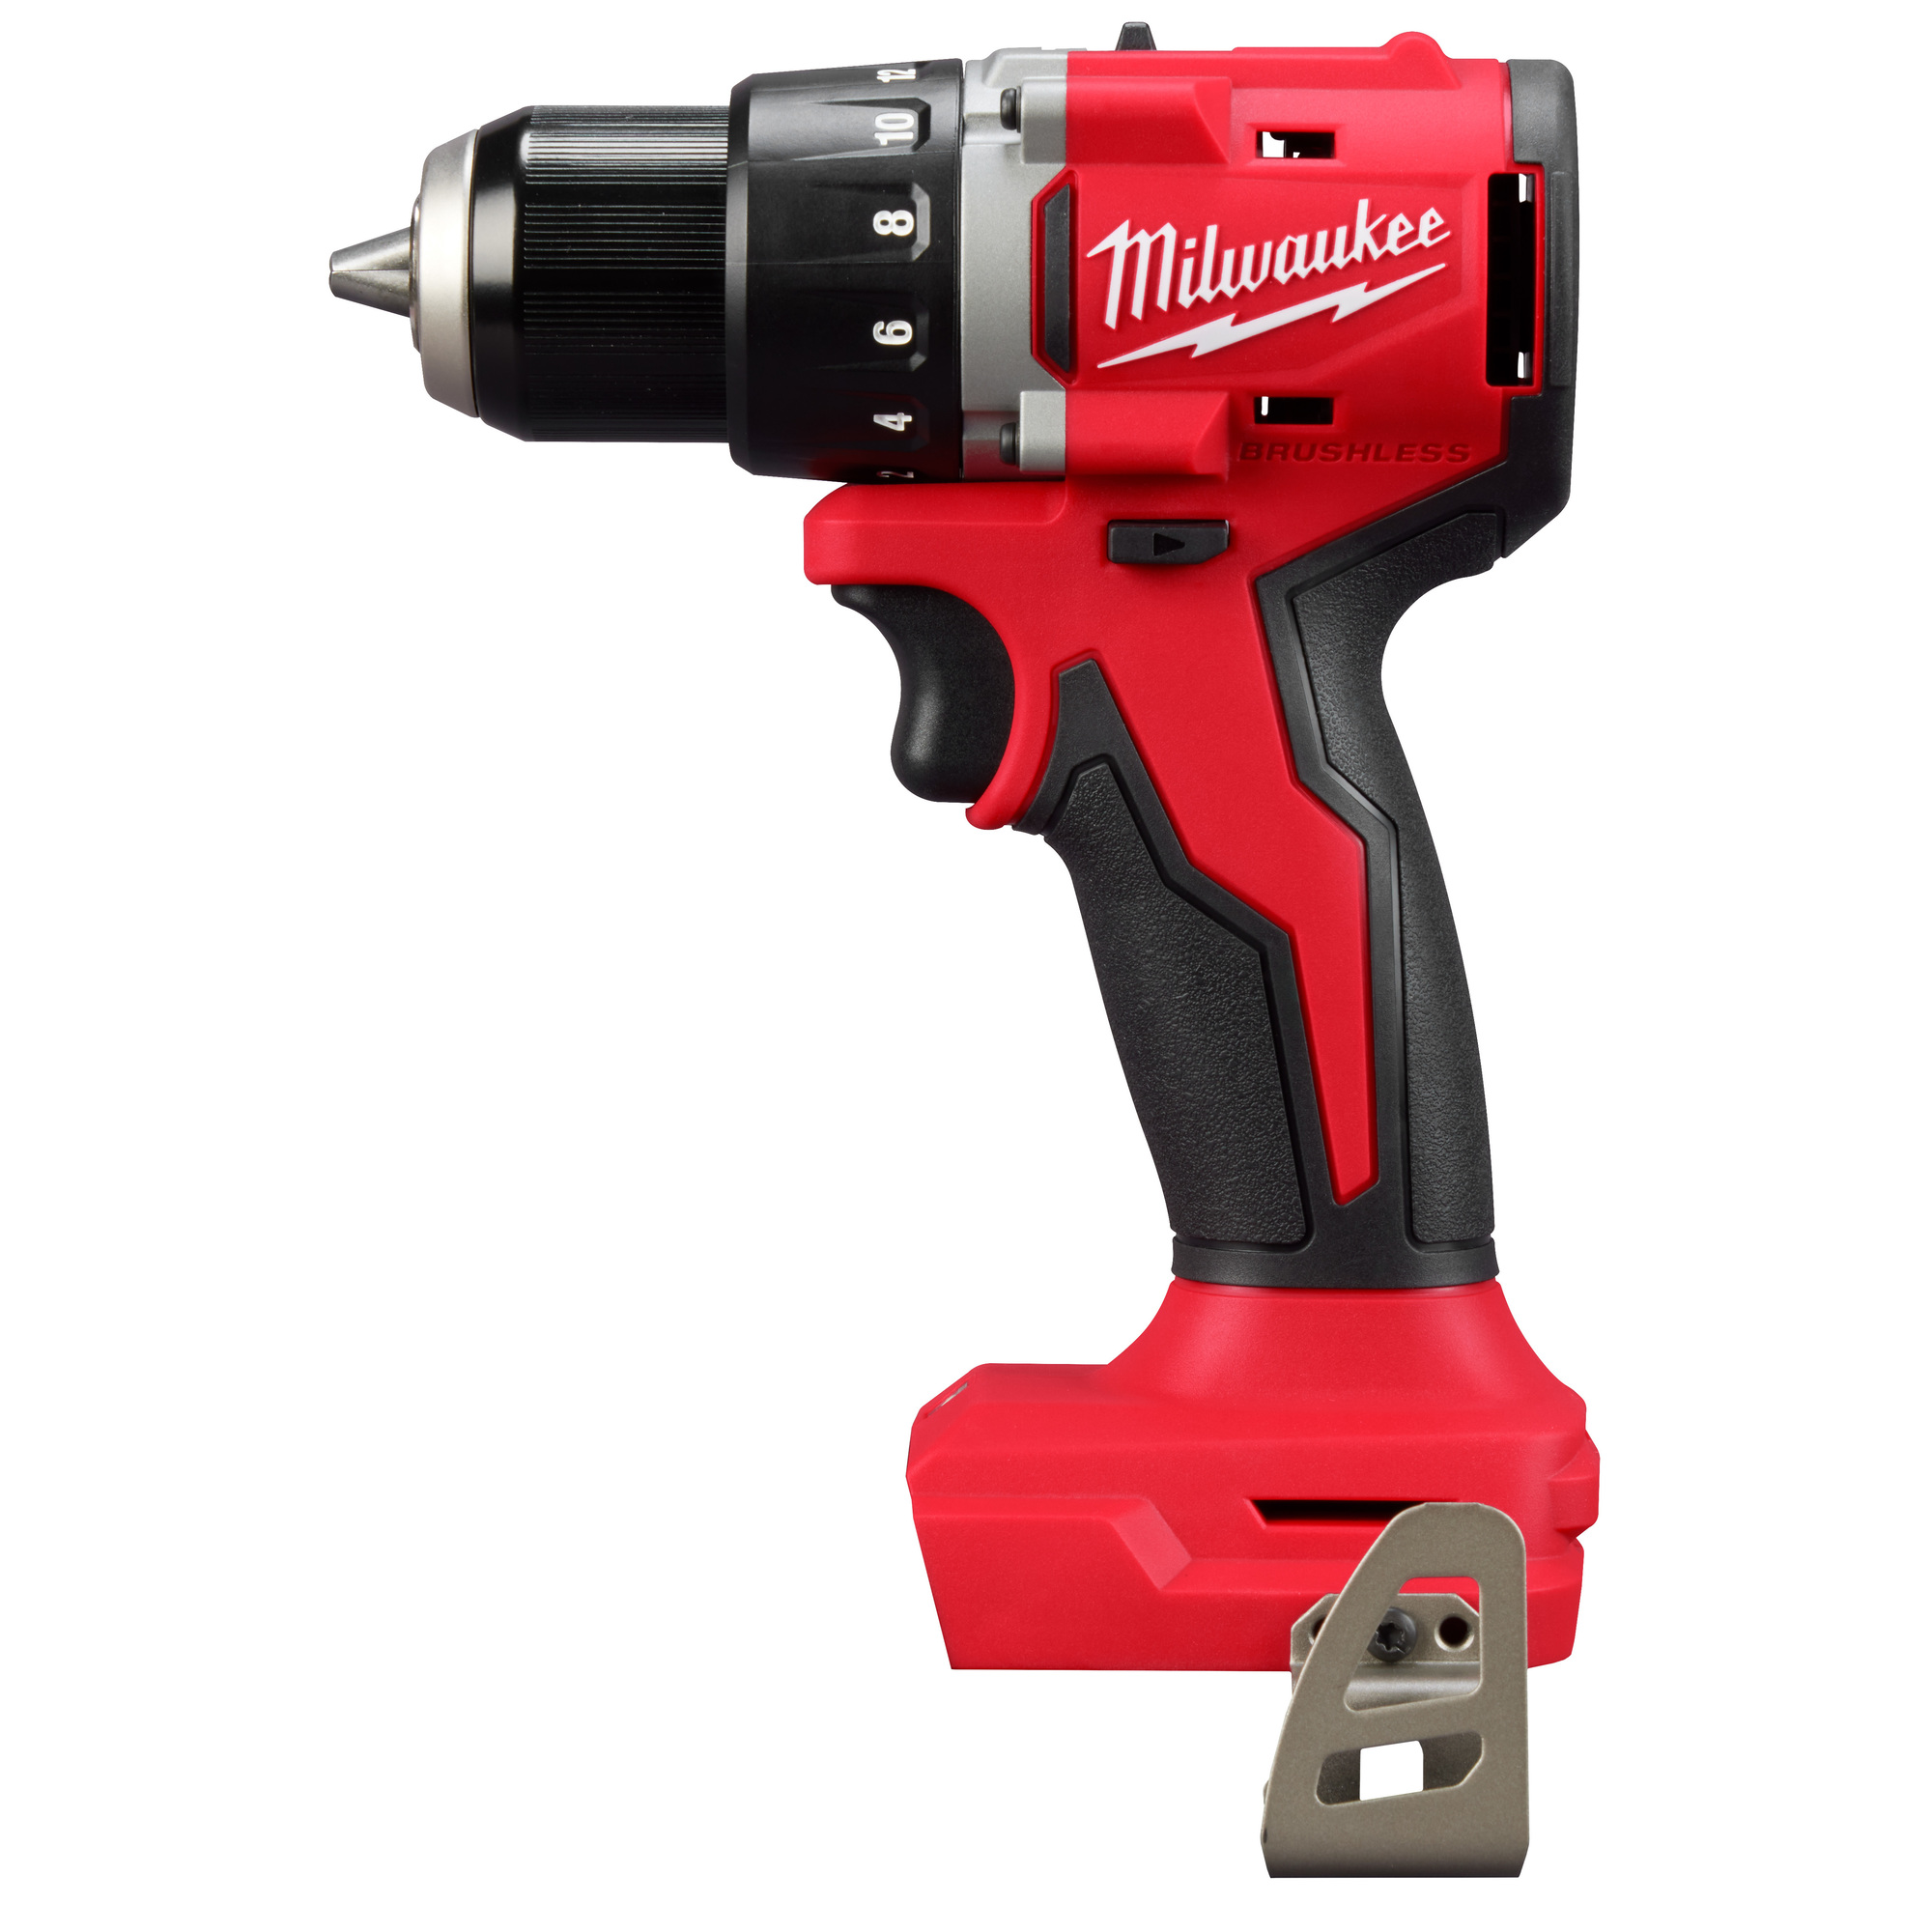 M18 Compact Brushless 1/2Inch Drill/ Driver, Chuck Size 1/2 in, Max. Torque 550 ft-lbs., Max. Speed 1700 rpm, Model - Milwaukee 3601-20